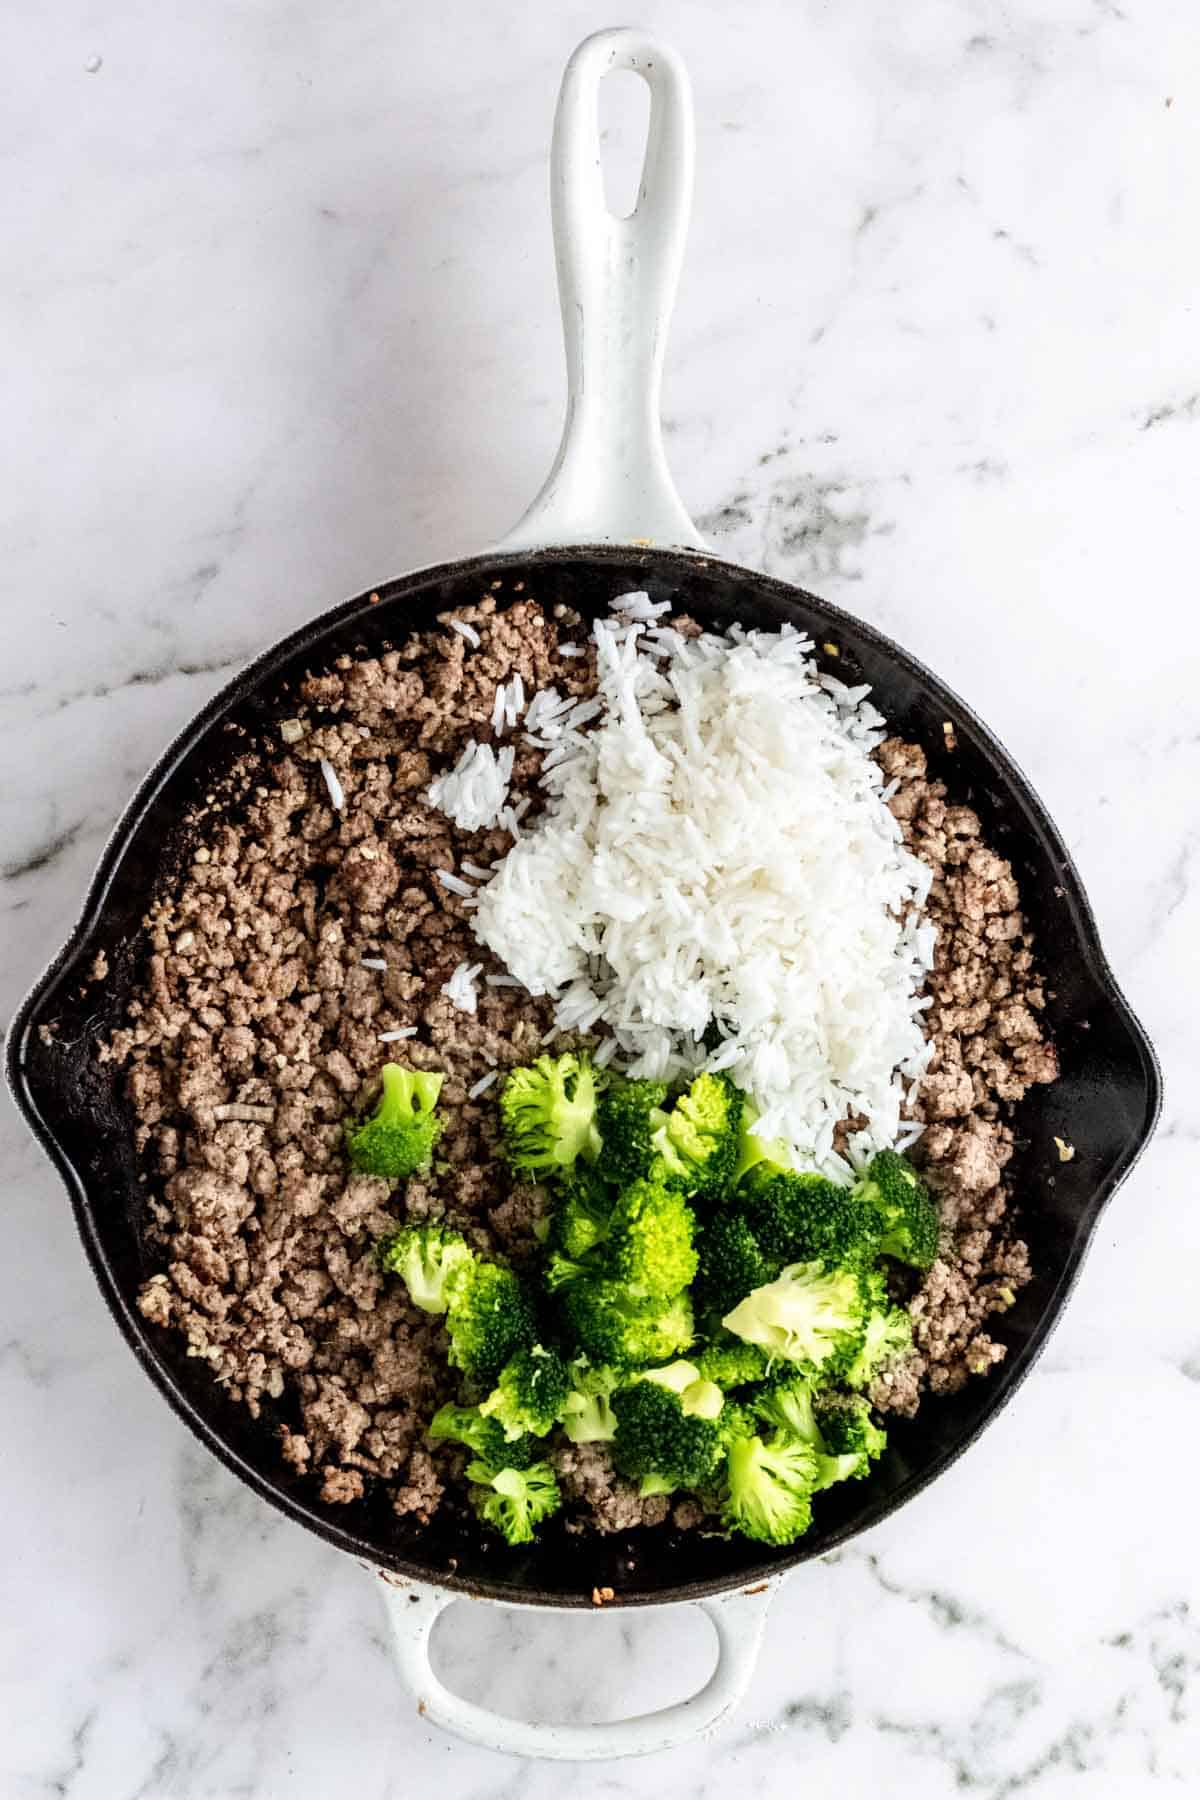 Cooked rice and broccoli added to a skillet with ground beef.